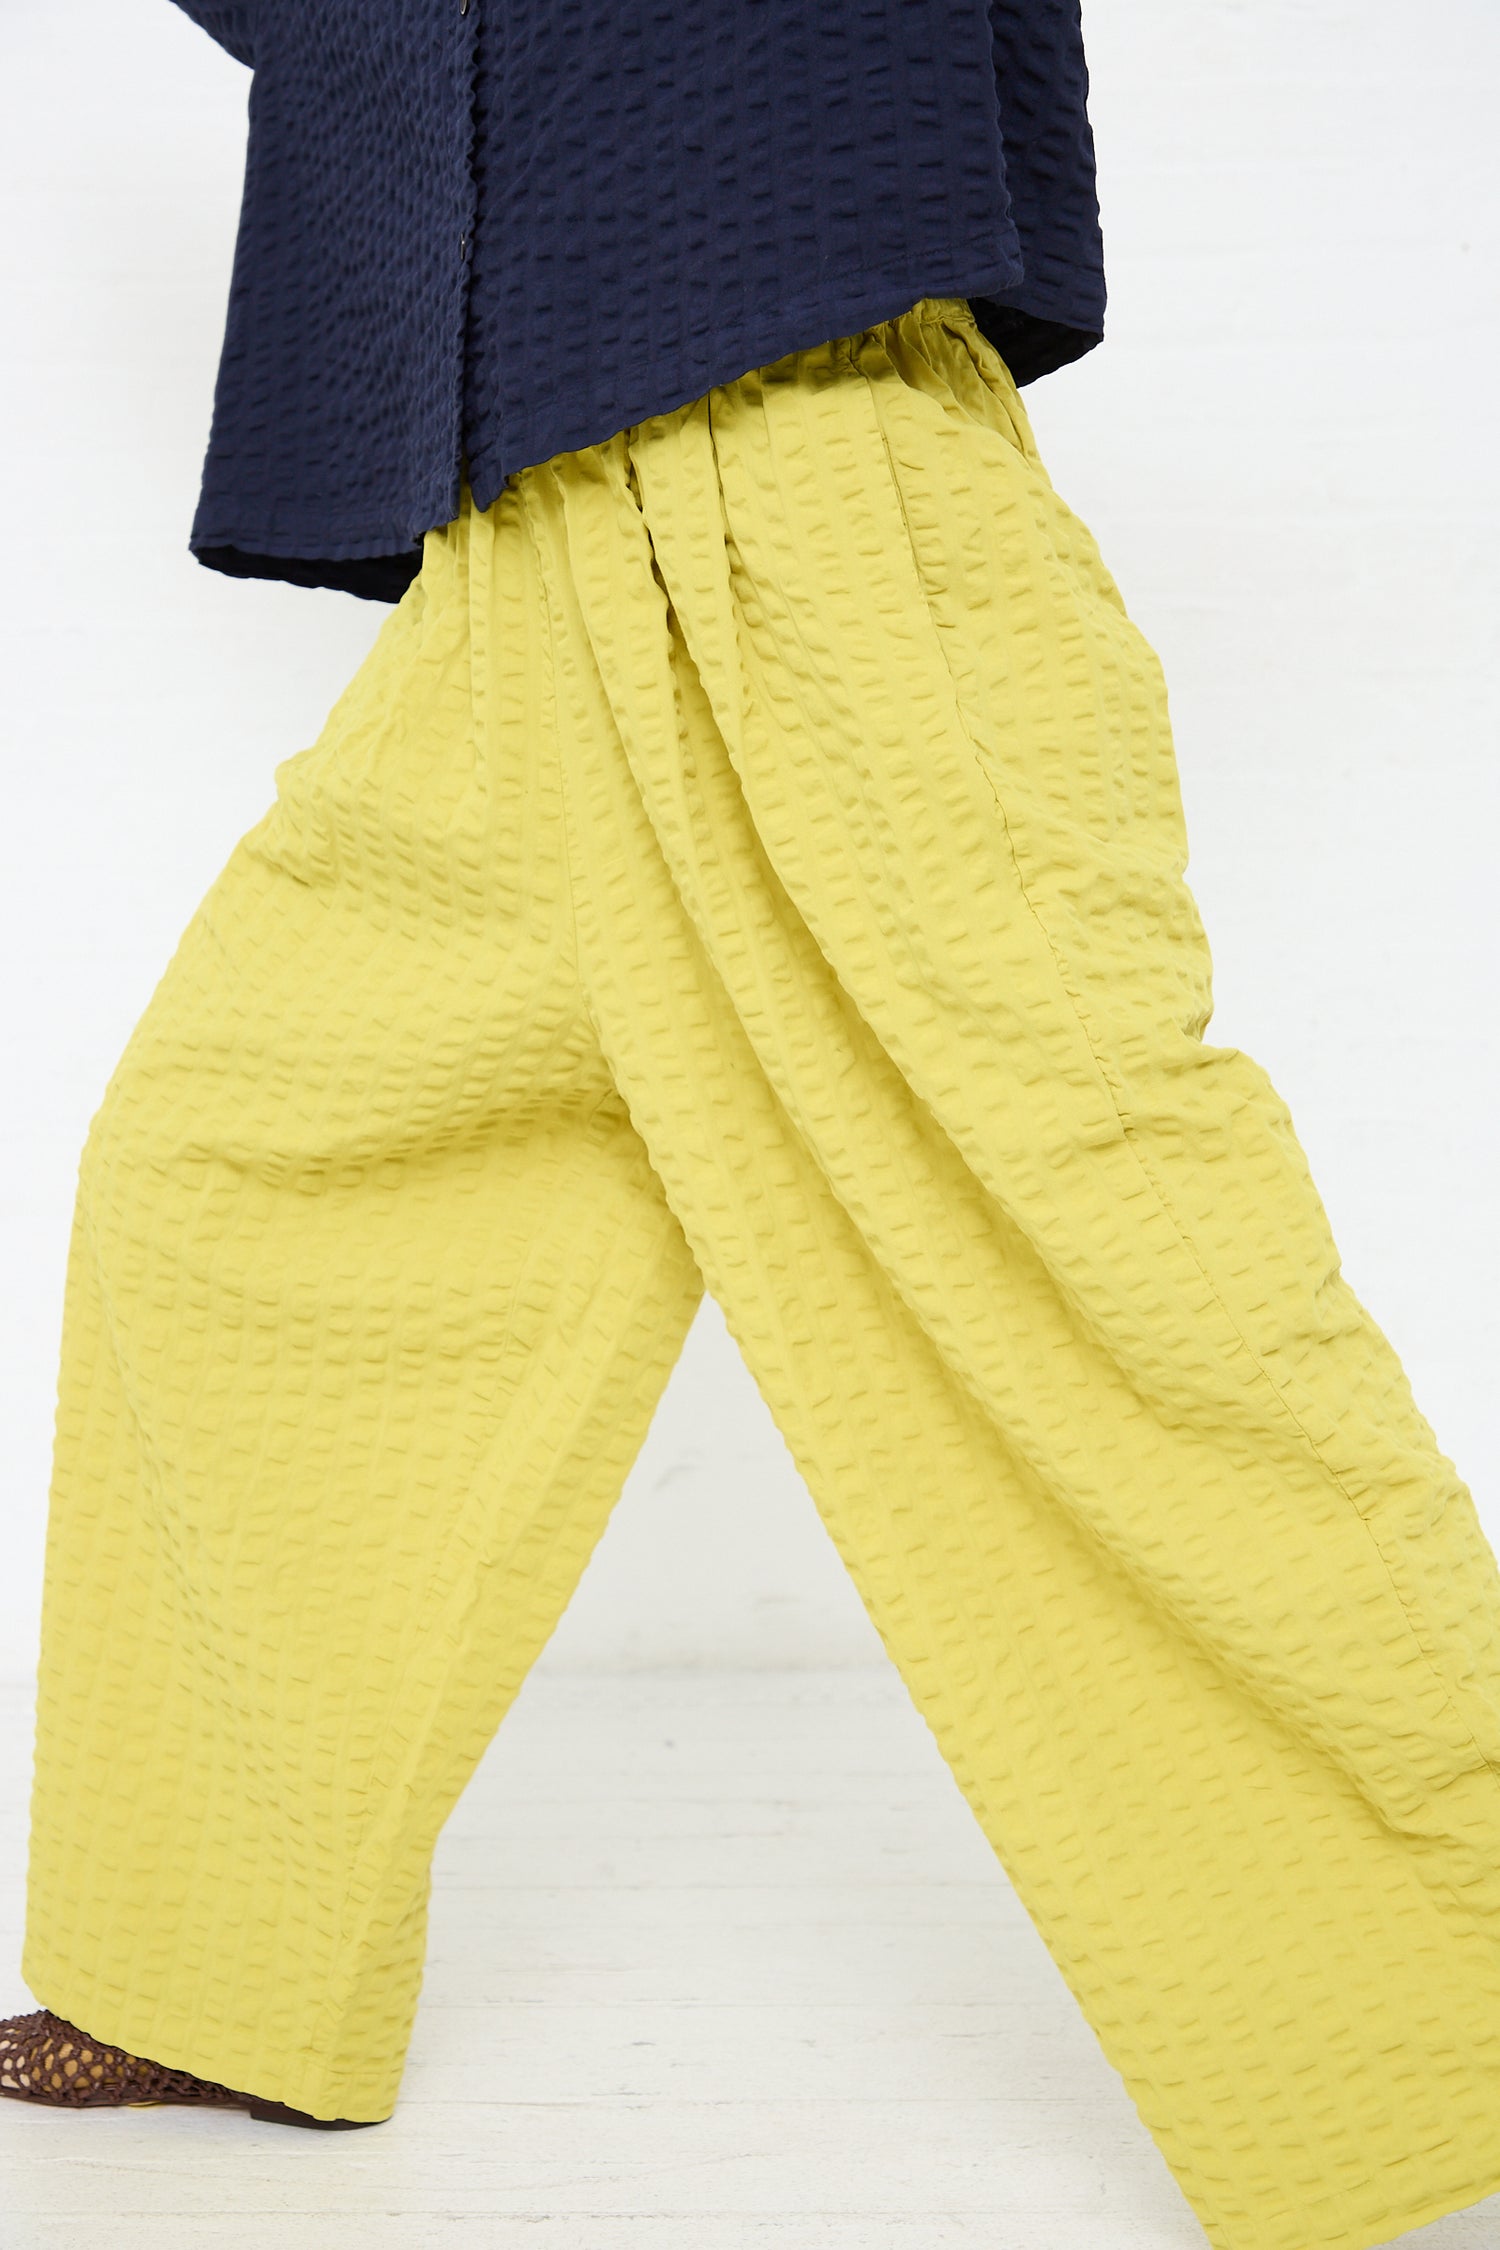 A person standing with their back to the camera, wearing a Cotton Seersucker Wide Pant in Turmeric by Black Crane and a portion of a dark blue quilted jacket visible, against a white background.